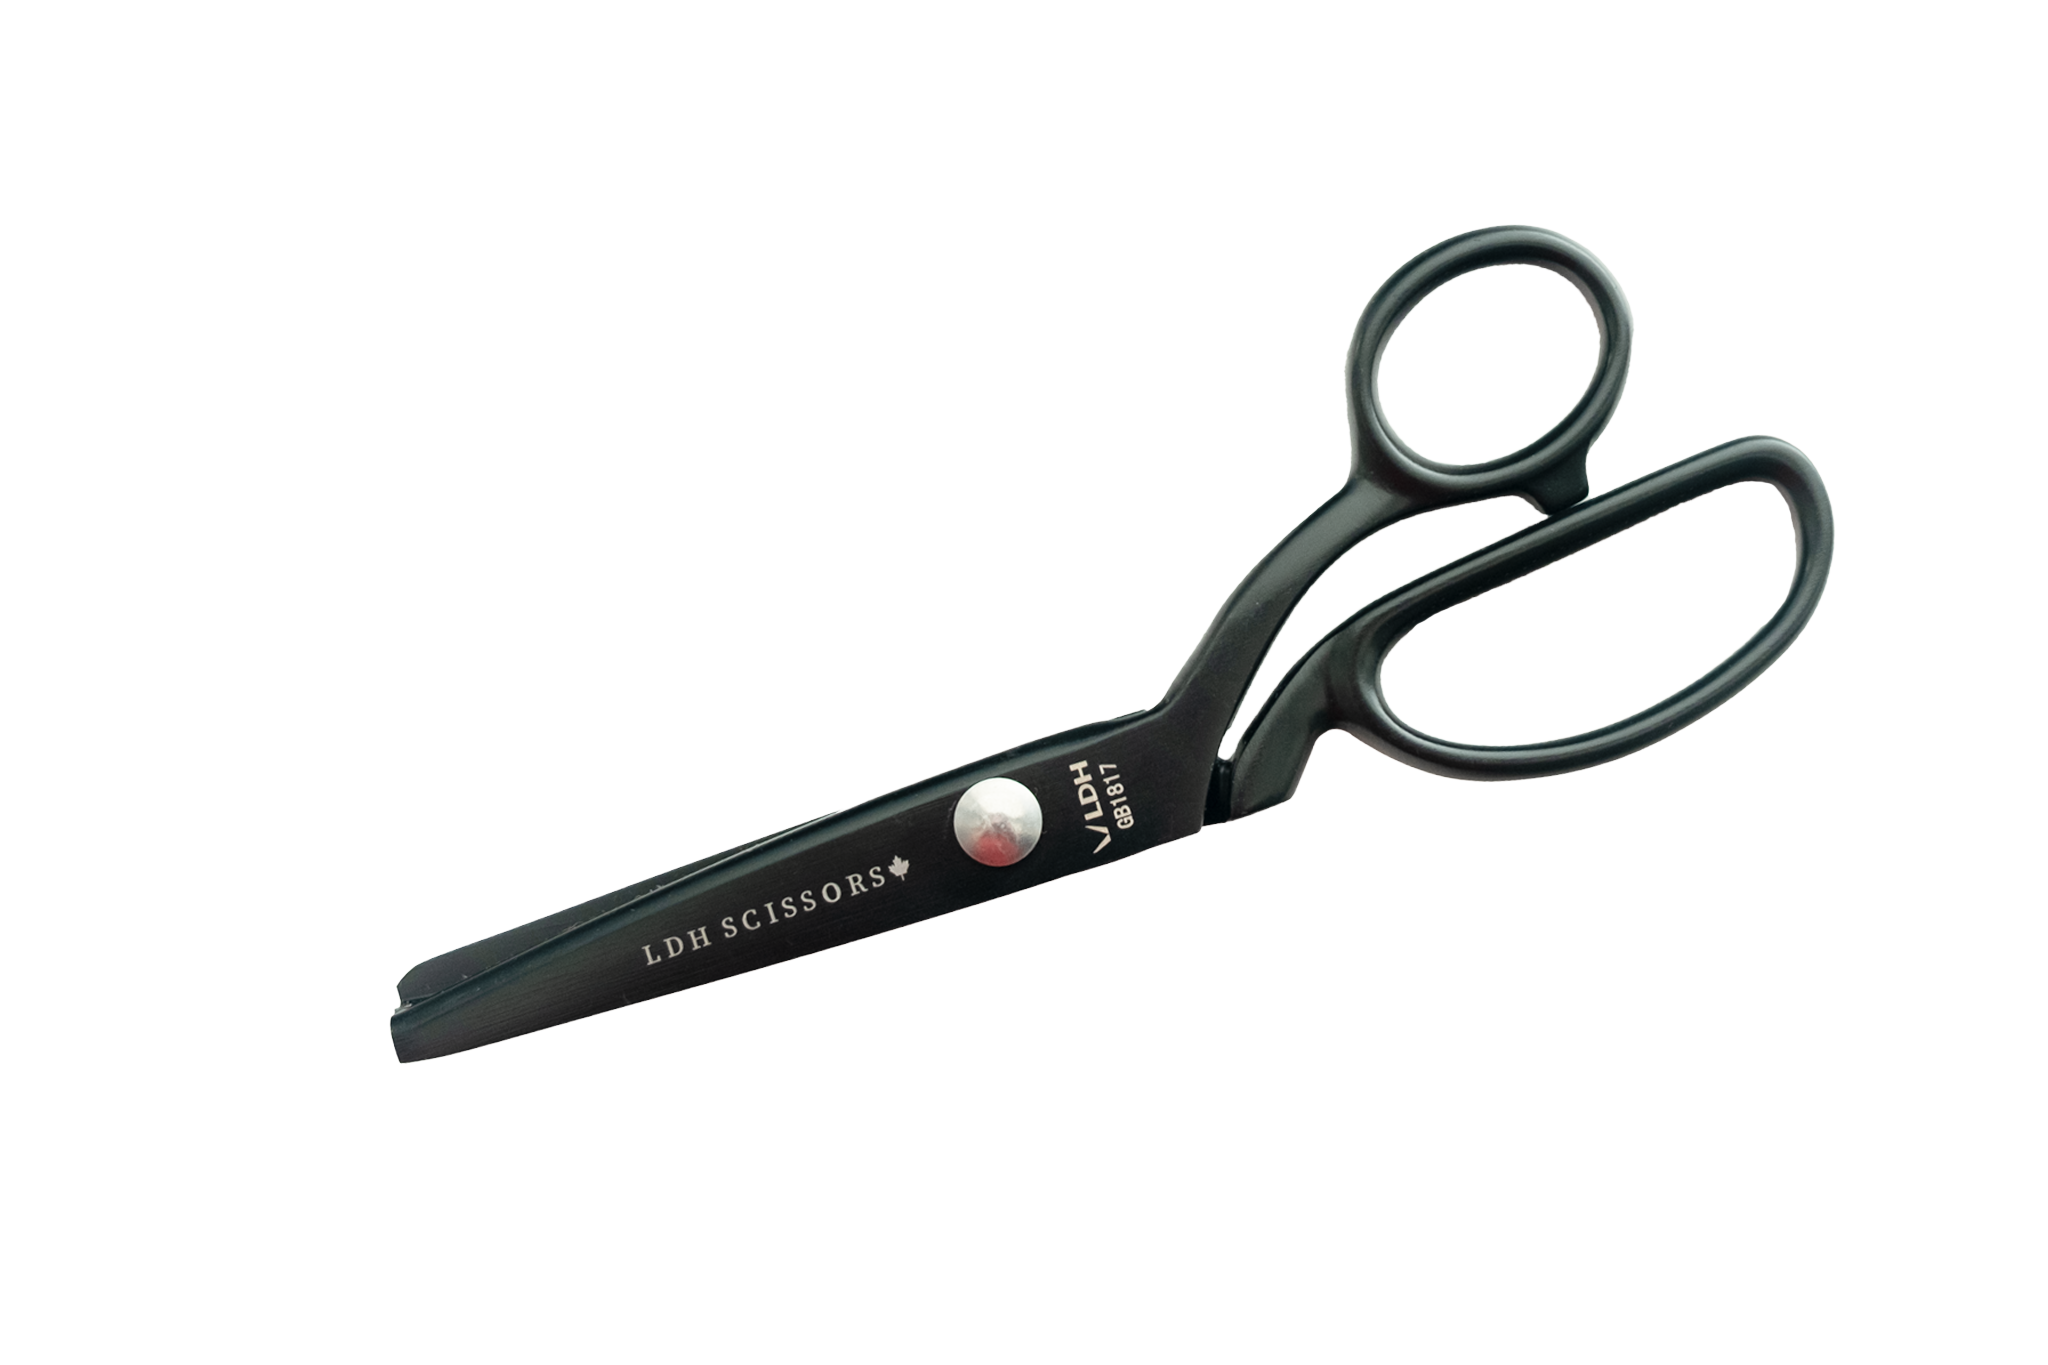 Midnight Edition Pinking Shears (2 Sizes)